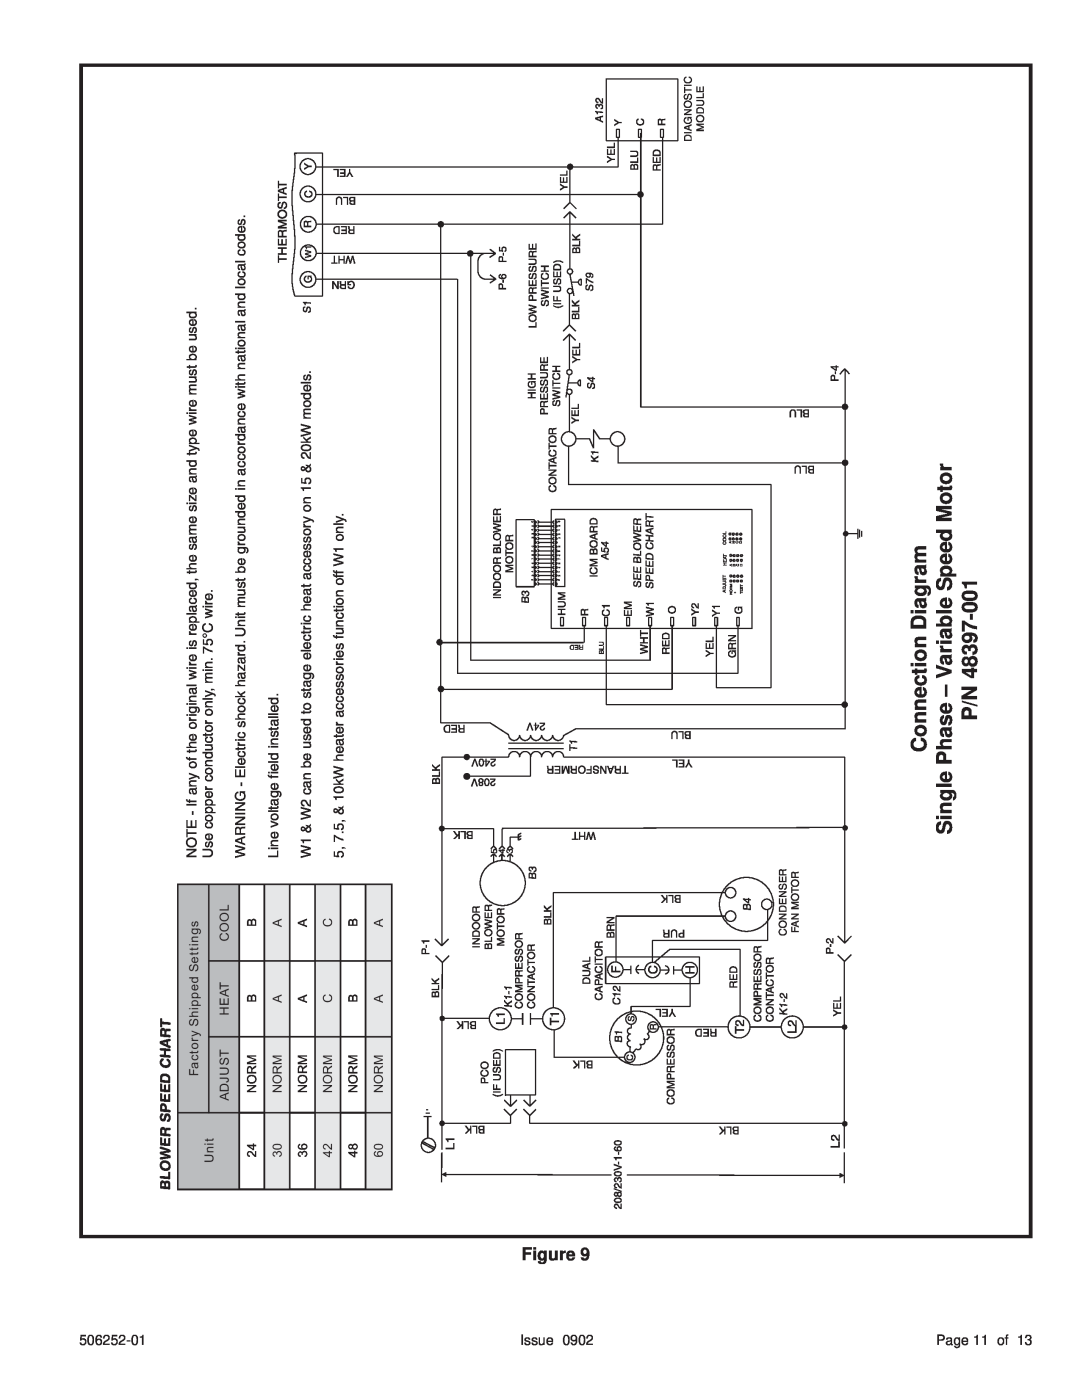 Allied Air Enterprises 4)PCE(13, (2 Connection Diagram, Single Phase - Variable Speed Motor P/N, Issue, Blower Speed Chart 